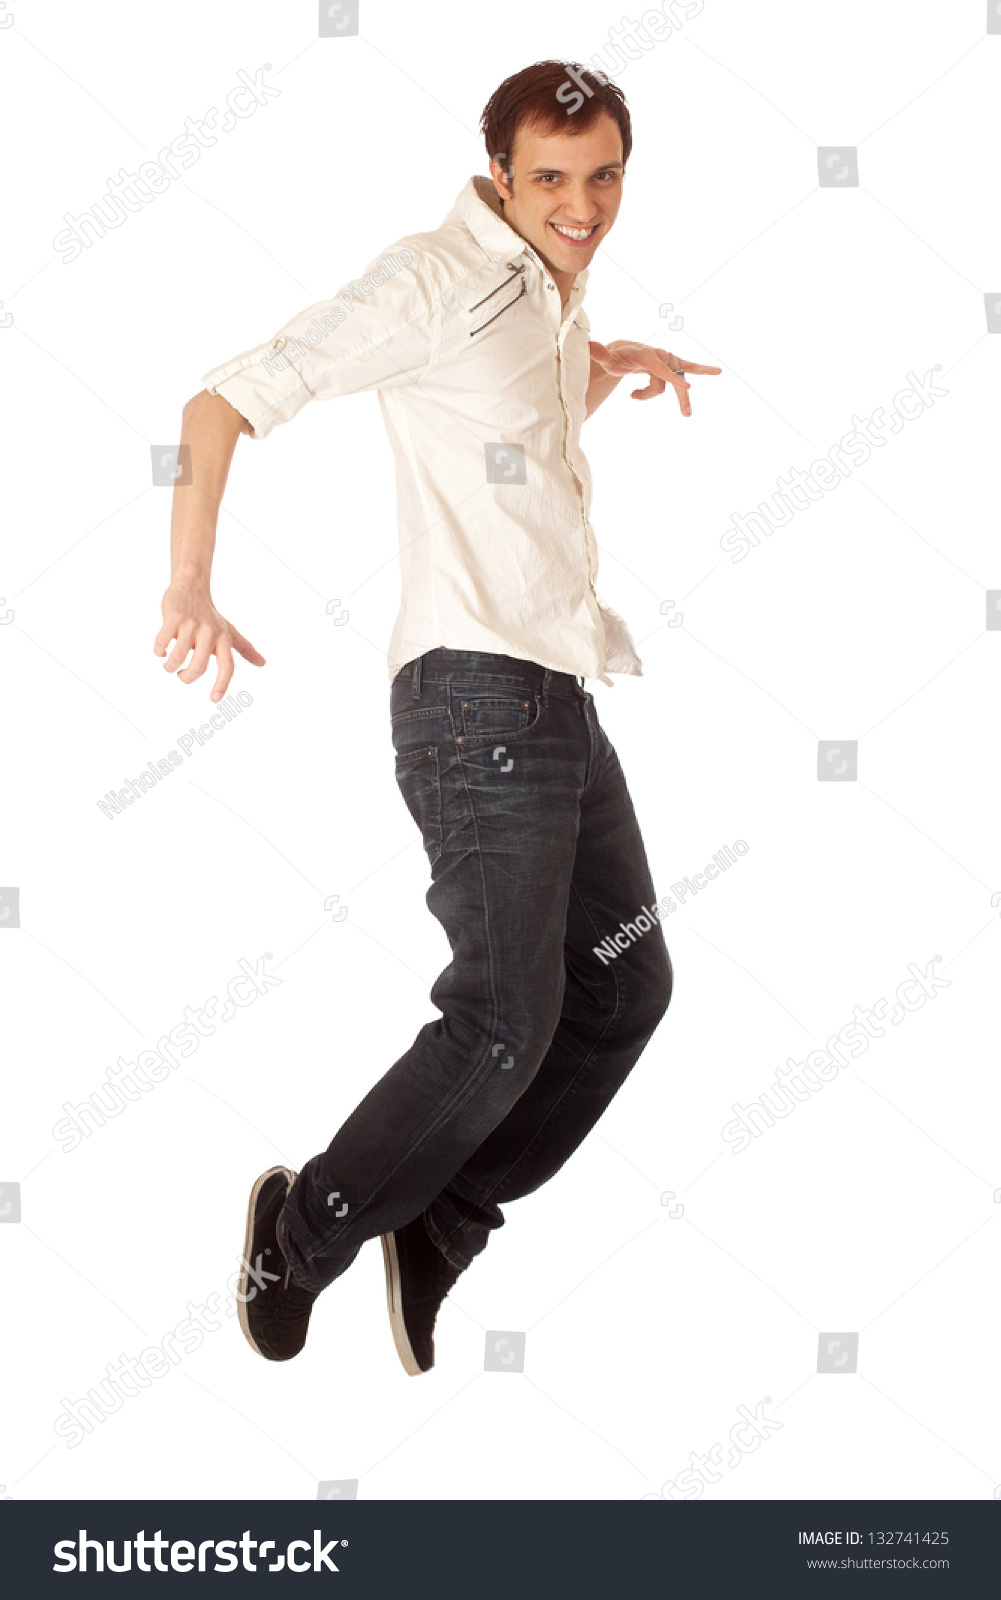 Casual young man jumping. Studio shot over white. #132741425